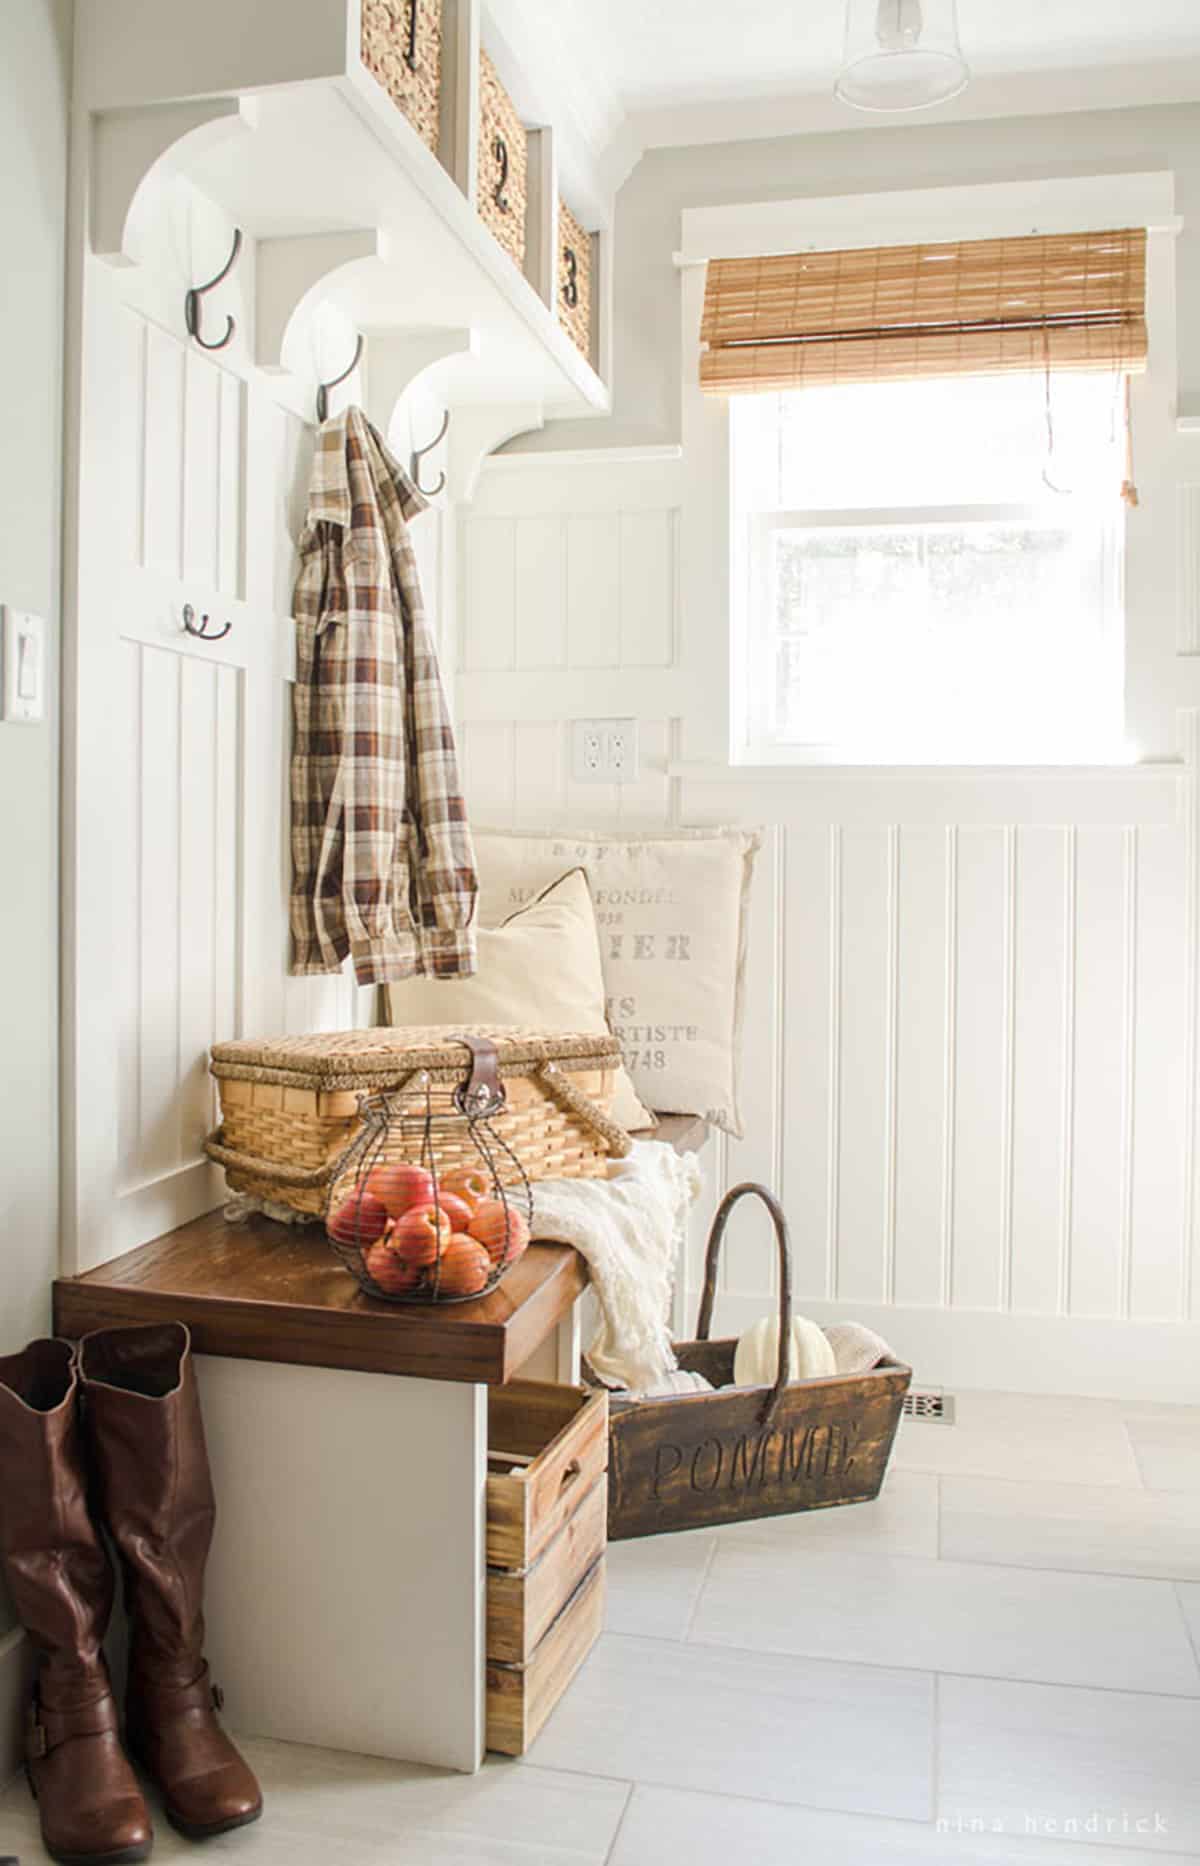 A mudroom with a fall-inspired bench and baskets.